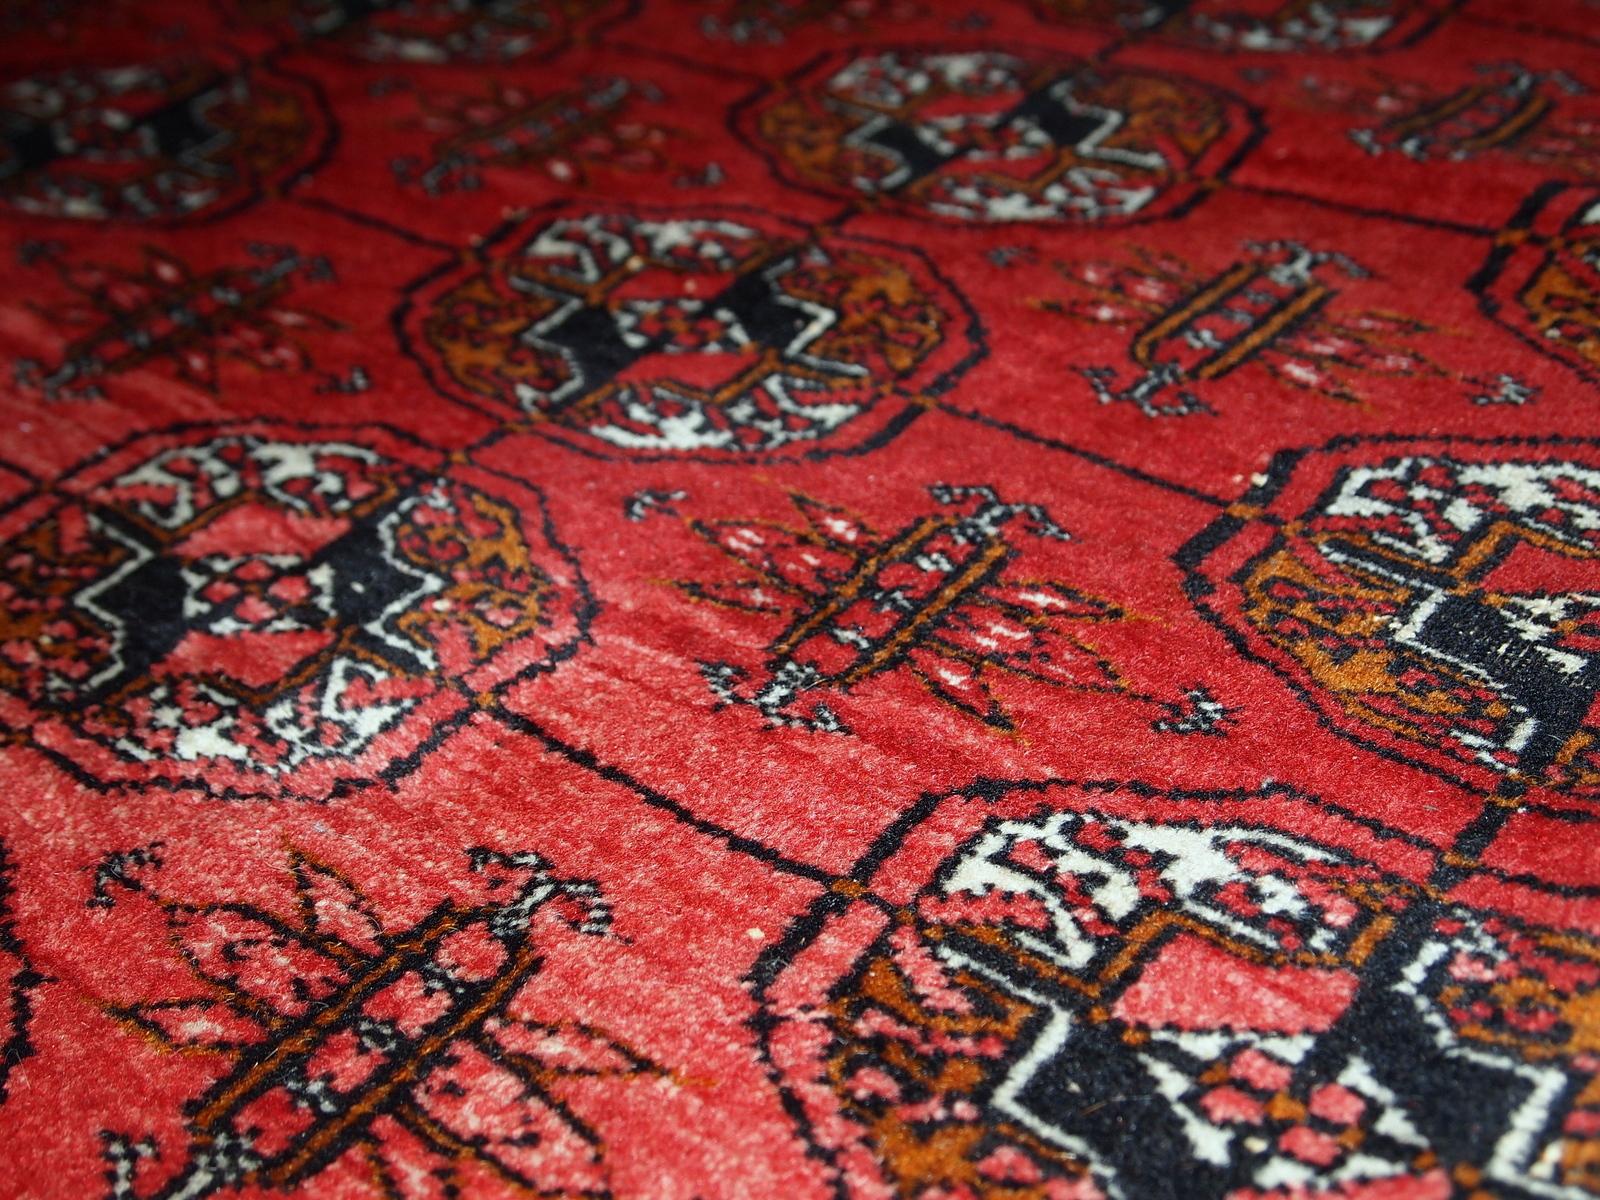 Handmade midcentury Pakistani rug in the style of Turkmen Tekke. Repeating elephant foot design on the bright red background. The rug has some signs of age but generally in original good condition.
 